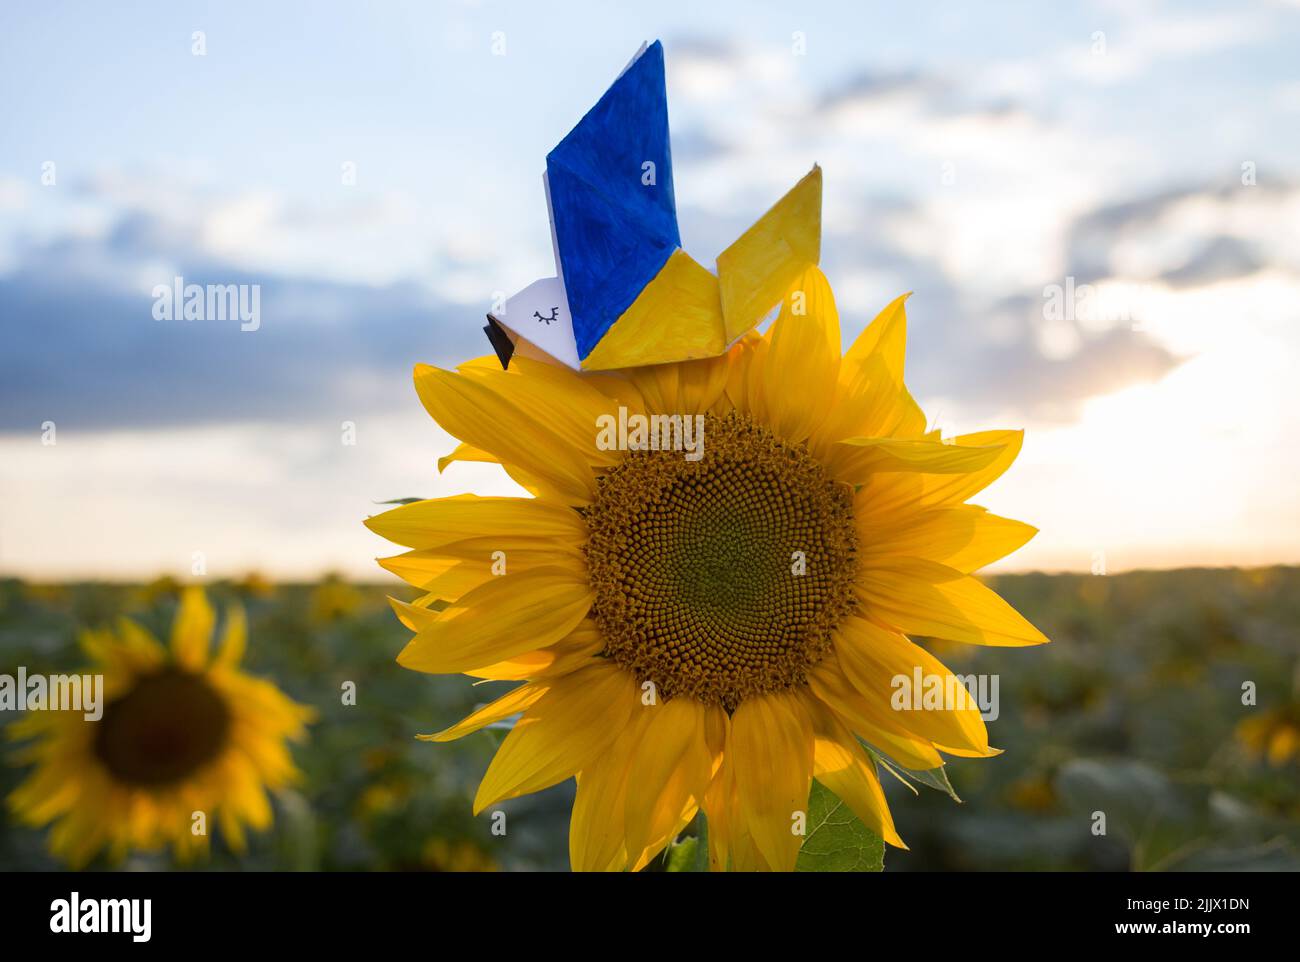 paper dove of peace, whose wings are painted in the yellow-blue colors of the Ukrainian flag, sits on a flower of a sunflower blooming on a field. Hel Stock Photo